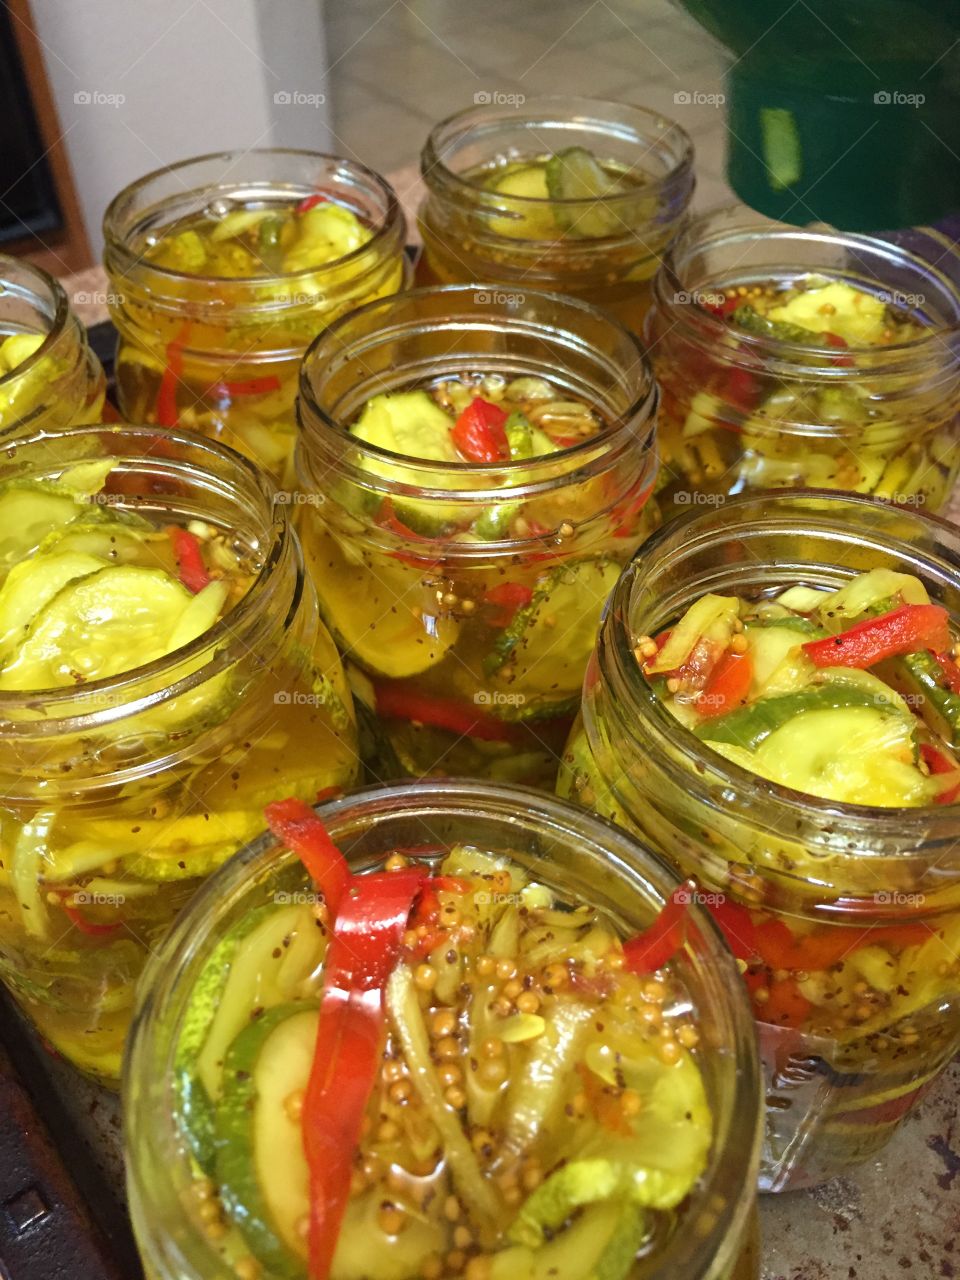 Home made bread & butter pickles!!!